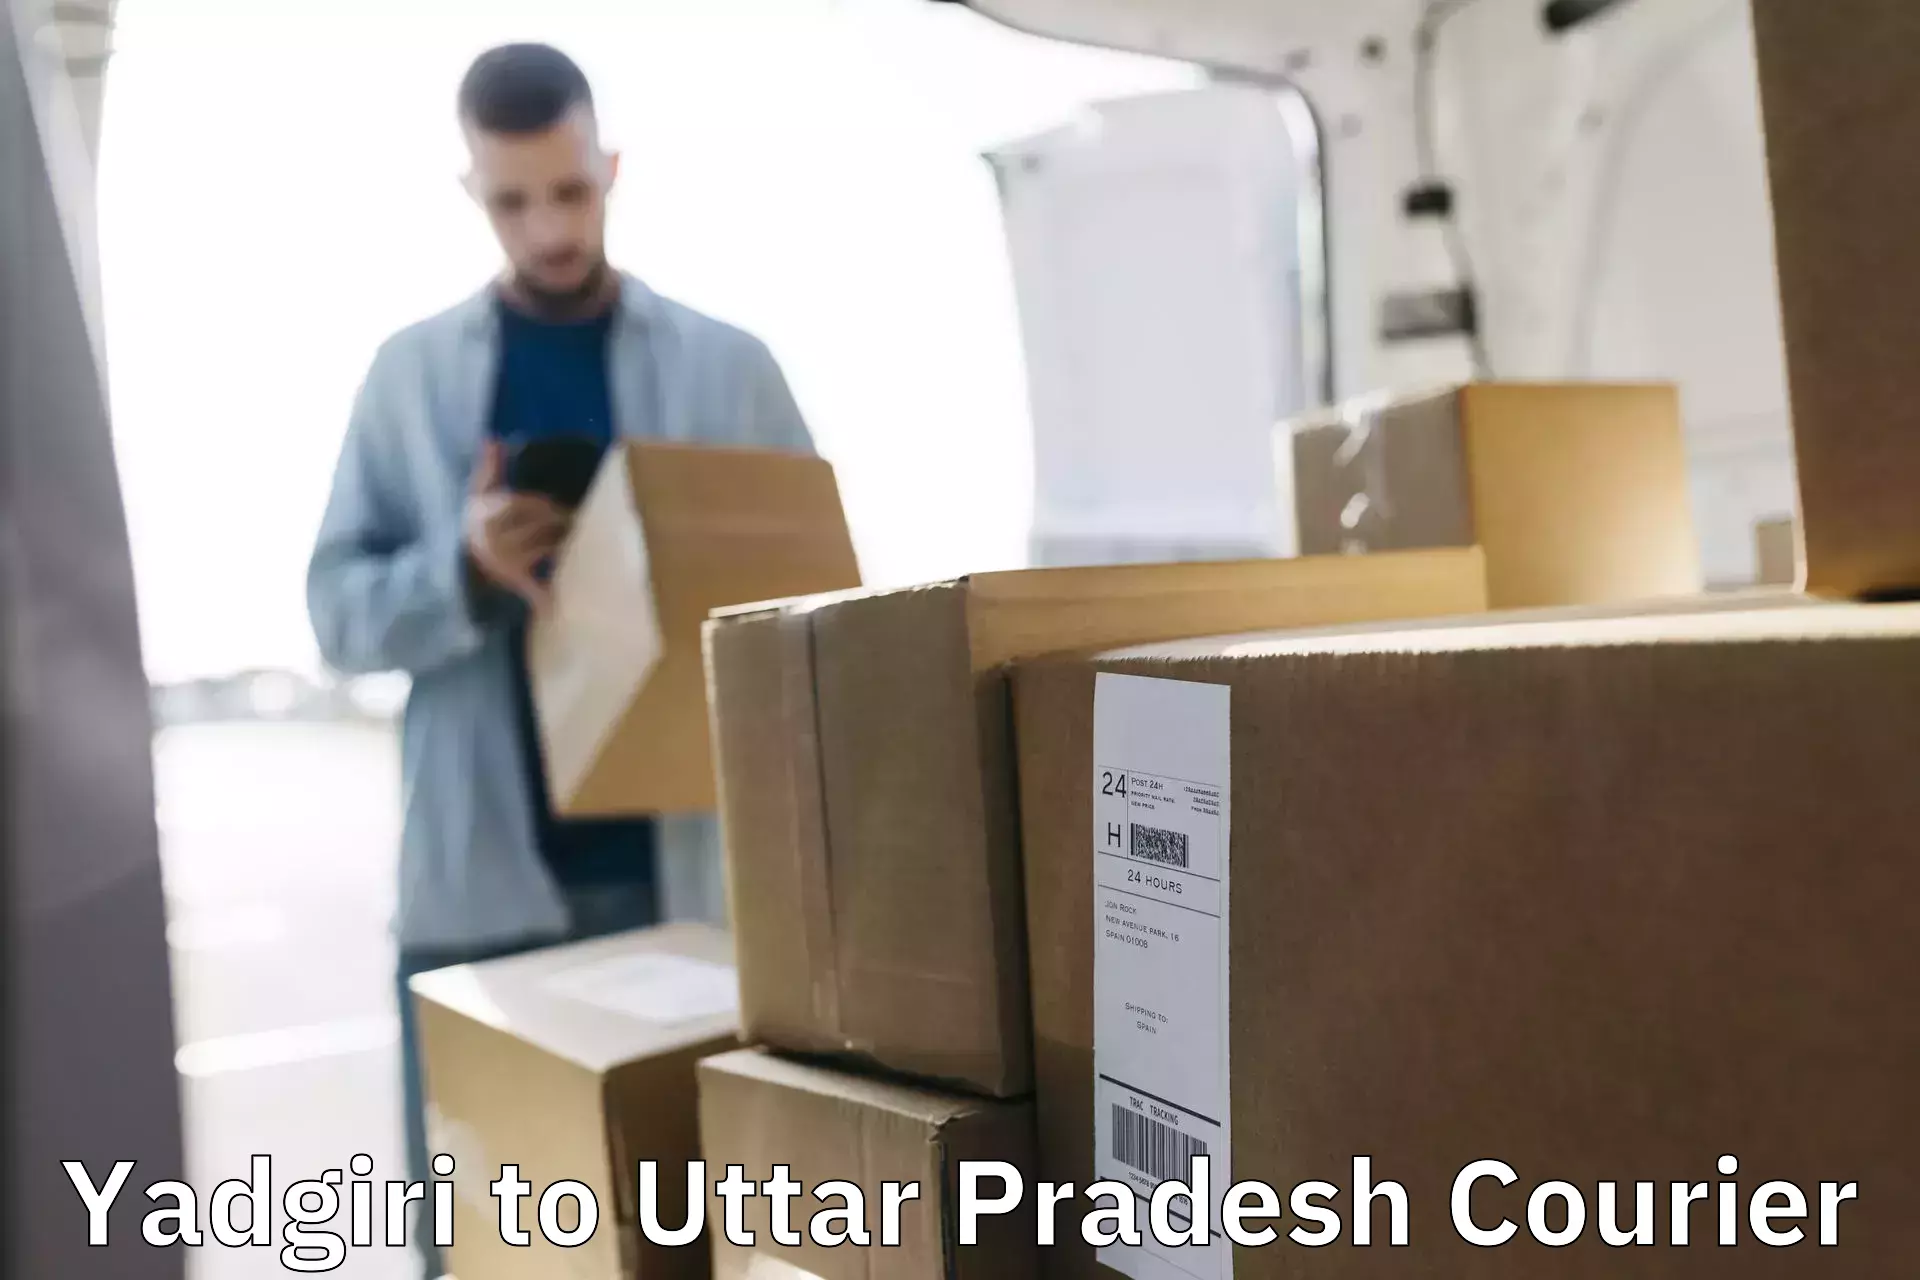 Automated parcel services Yadgiri to IIIT Lucknow